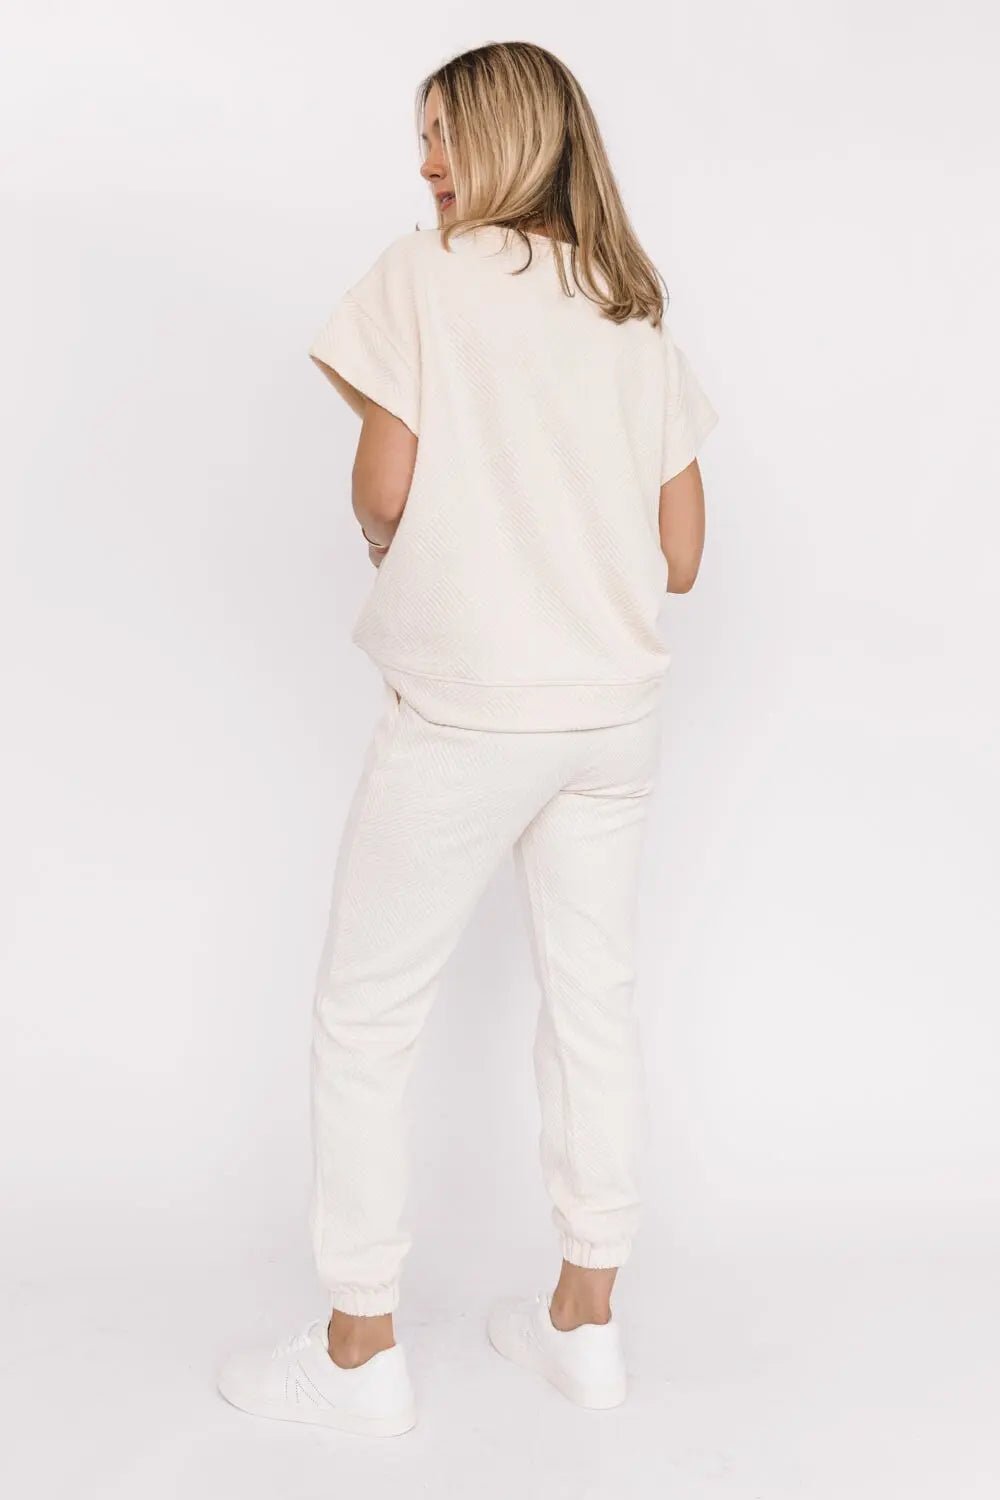 Weekend Vibe Cream Textured Joggers: Your Passport to Elevated